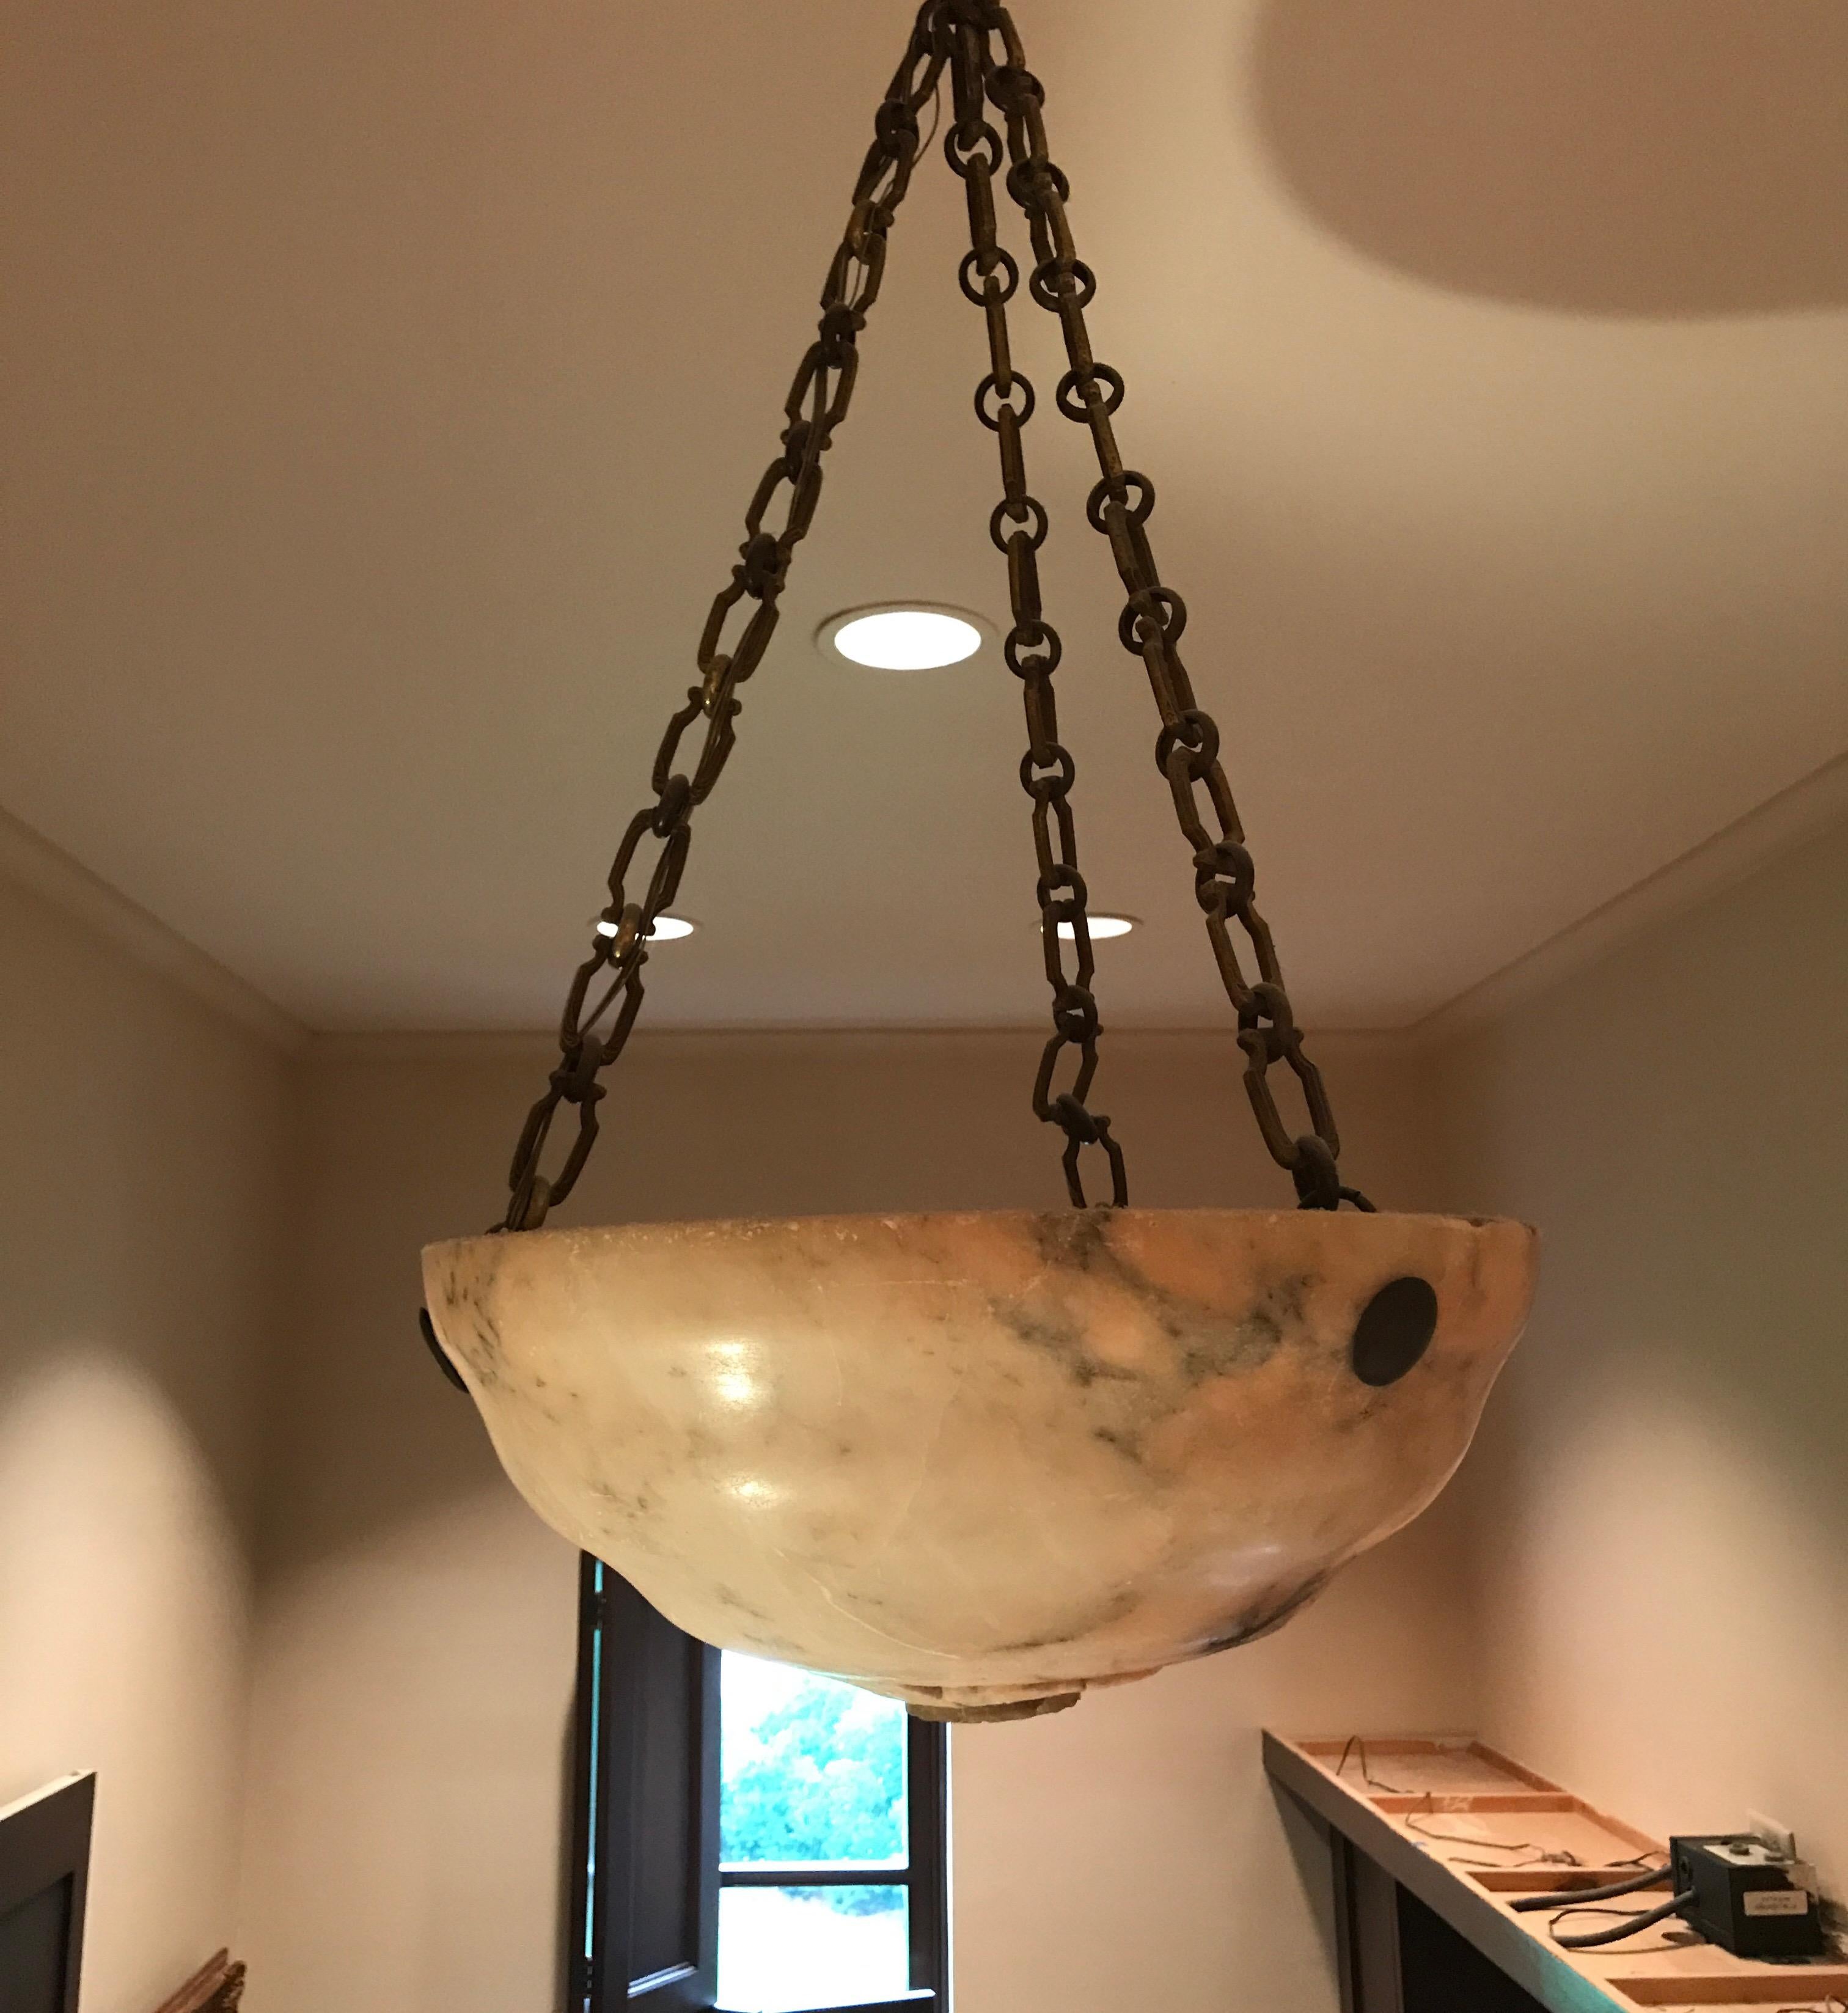 19th century Alabaster bowl chandelier with brass link chain. The bowl also has carving on the bottom with brass medallion. The alabaster is a beautiful color of blush terracotta.